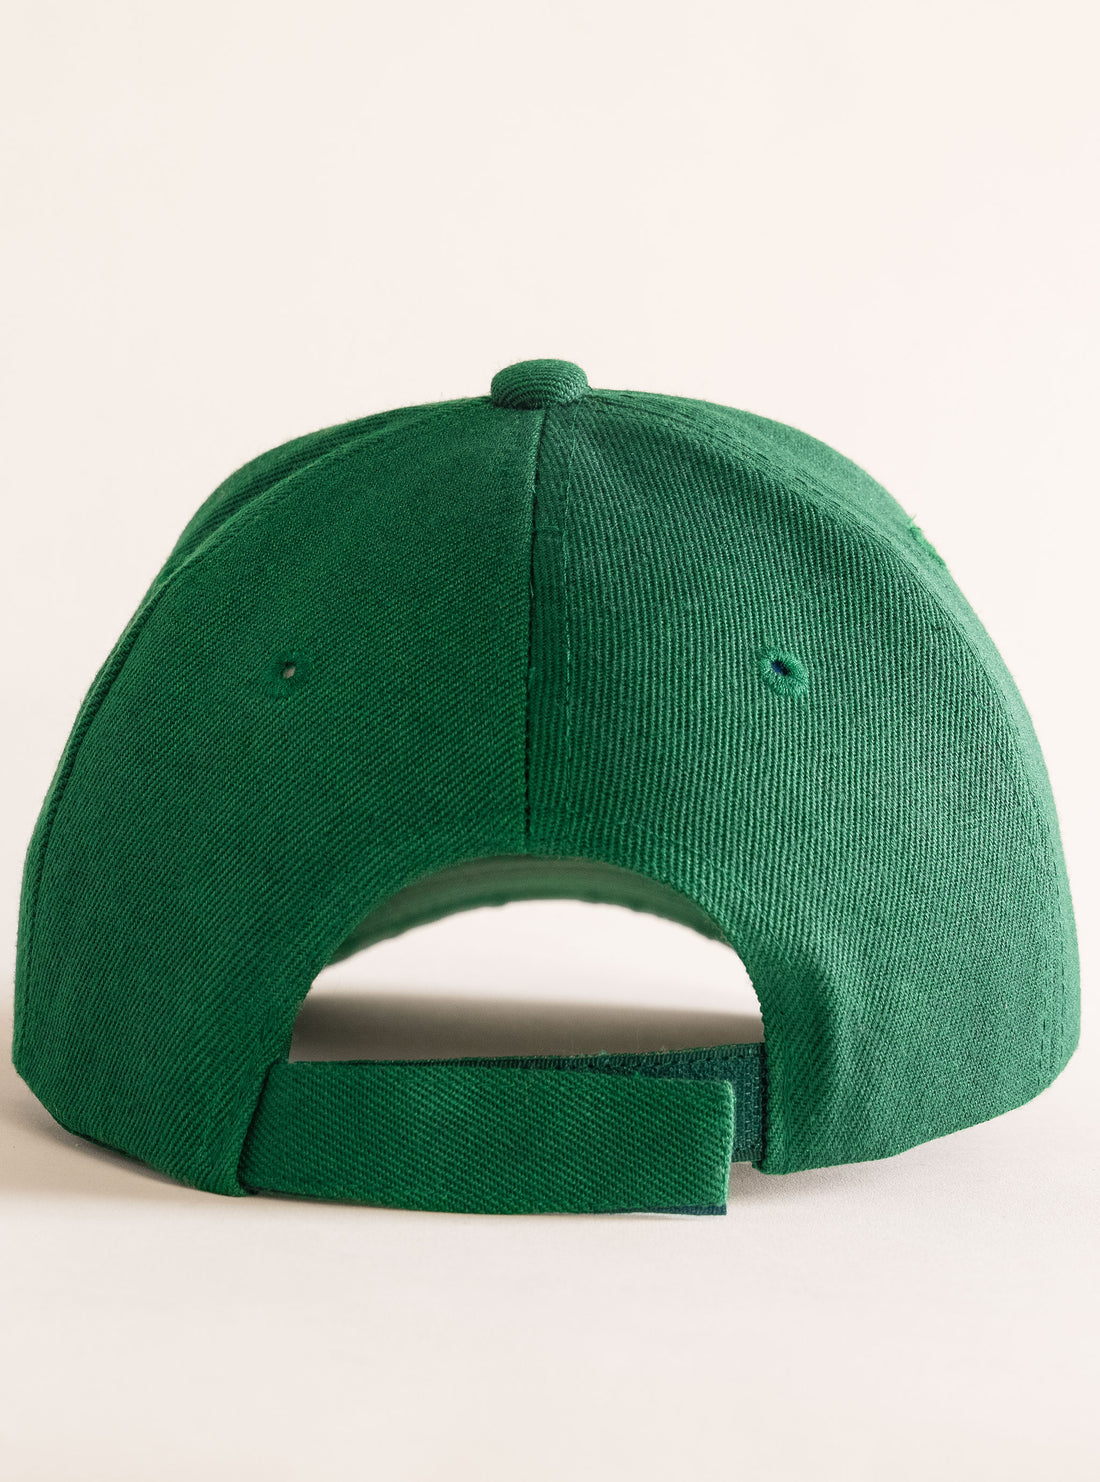 Rely On Me Hat, Verde Obscuro